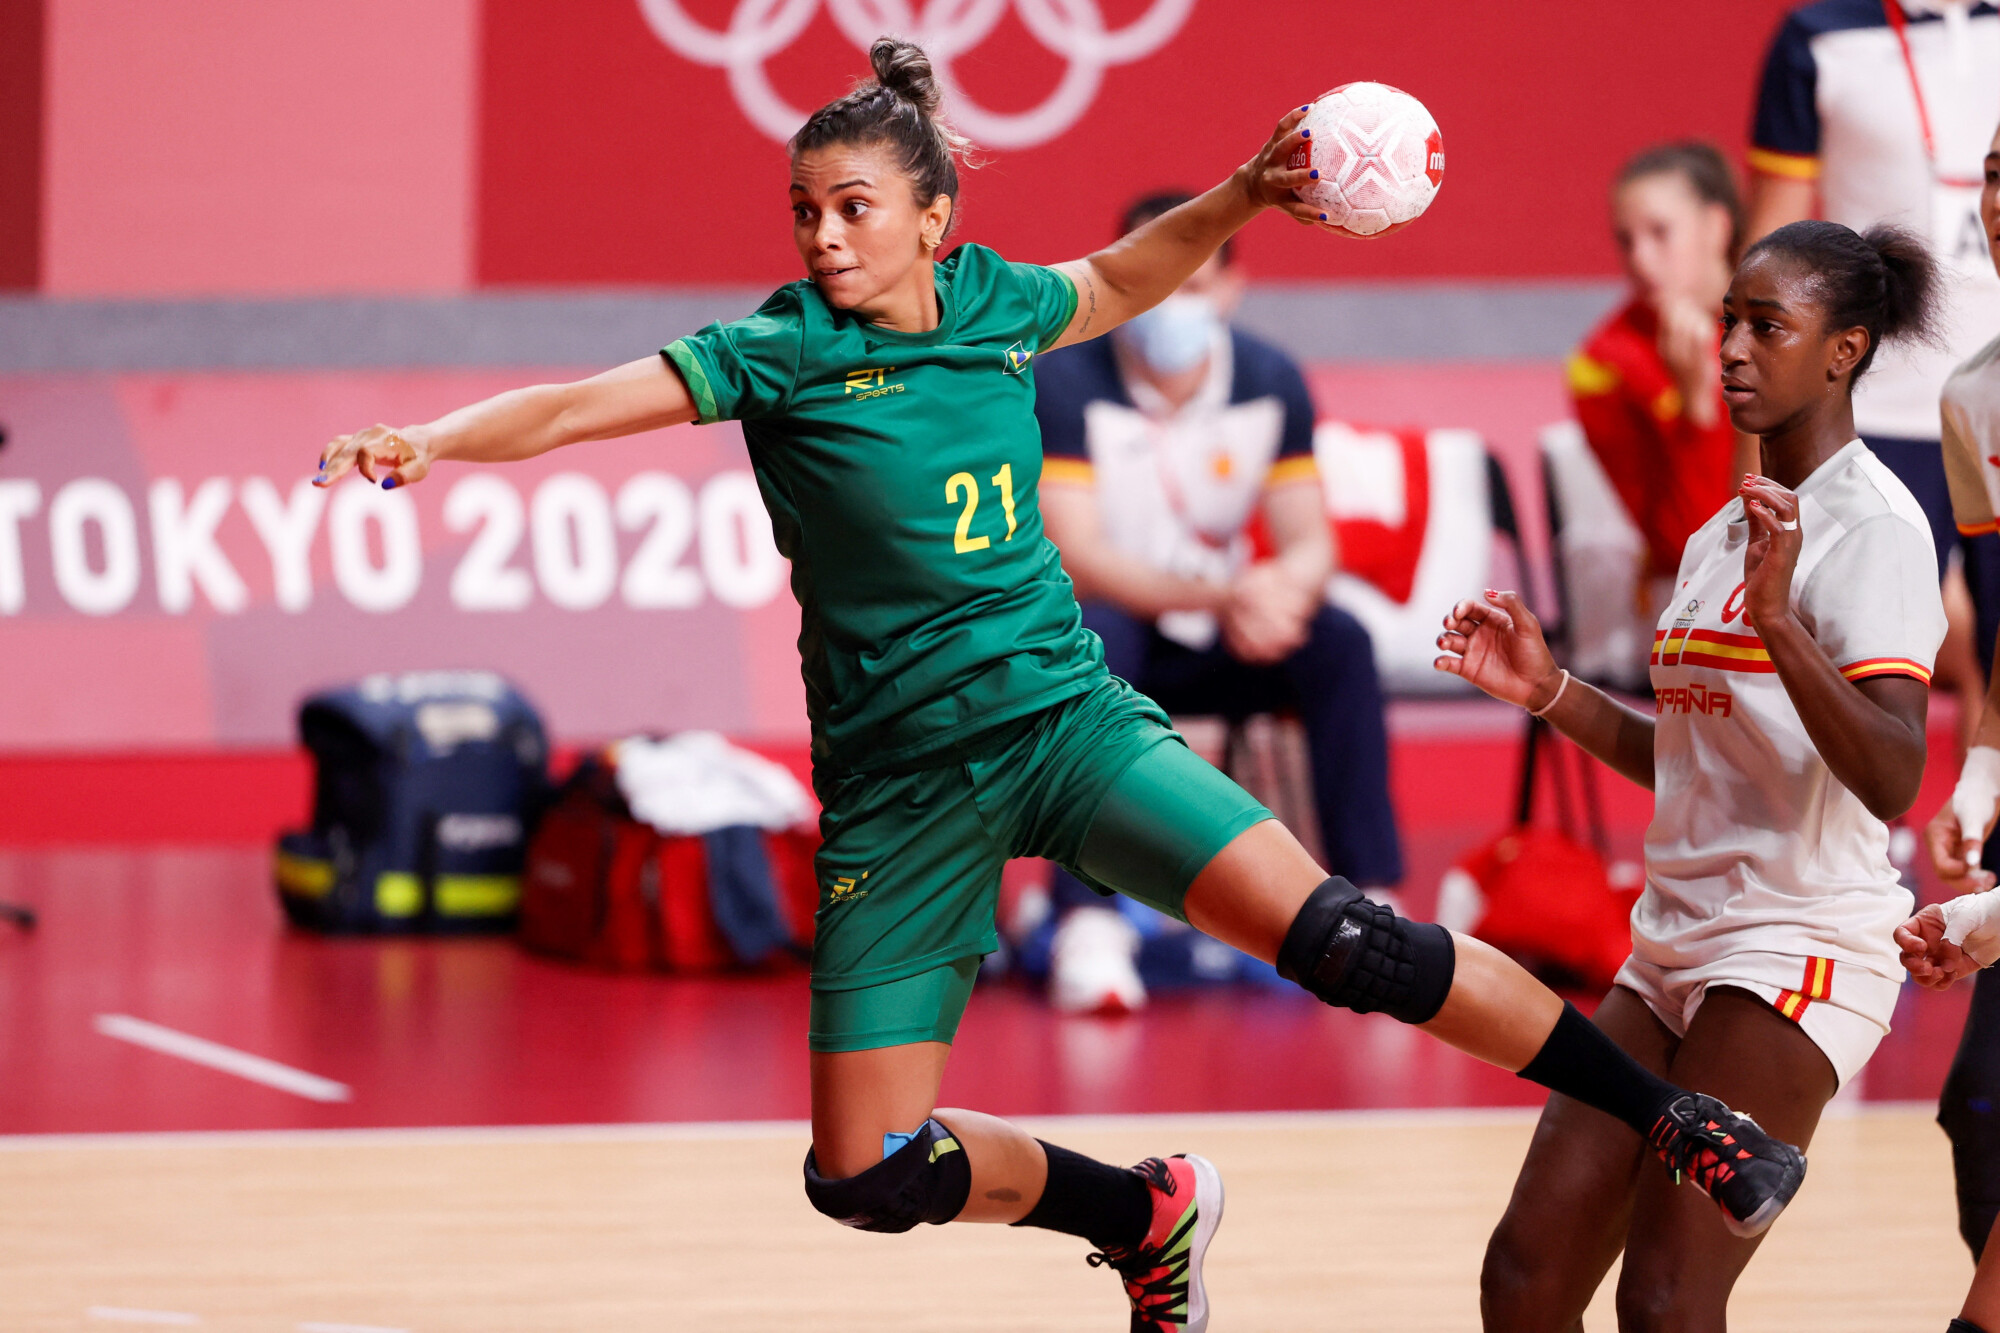 Brazil's Adriana Cardoso in action against Spain during a match for Women's Group B handball at the 2020 Olympic Games, at the Yoyogi National Stadium in Tokyo, Japan, 29 July 2021. Efe/ABACAPRESS.COM//Kai Foersterling 